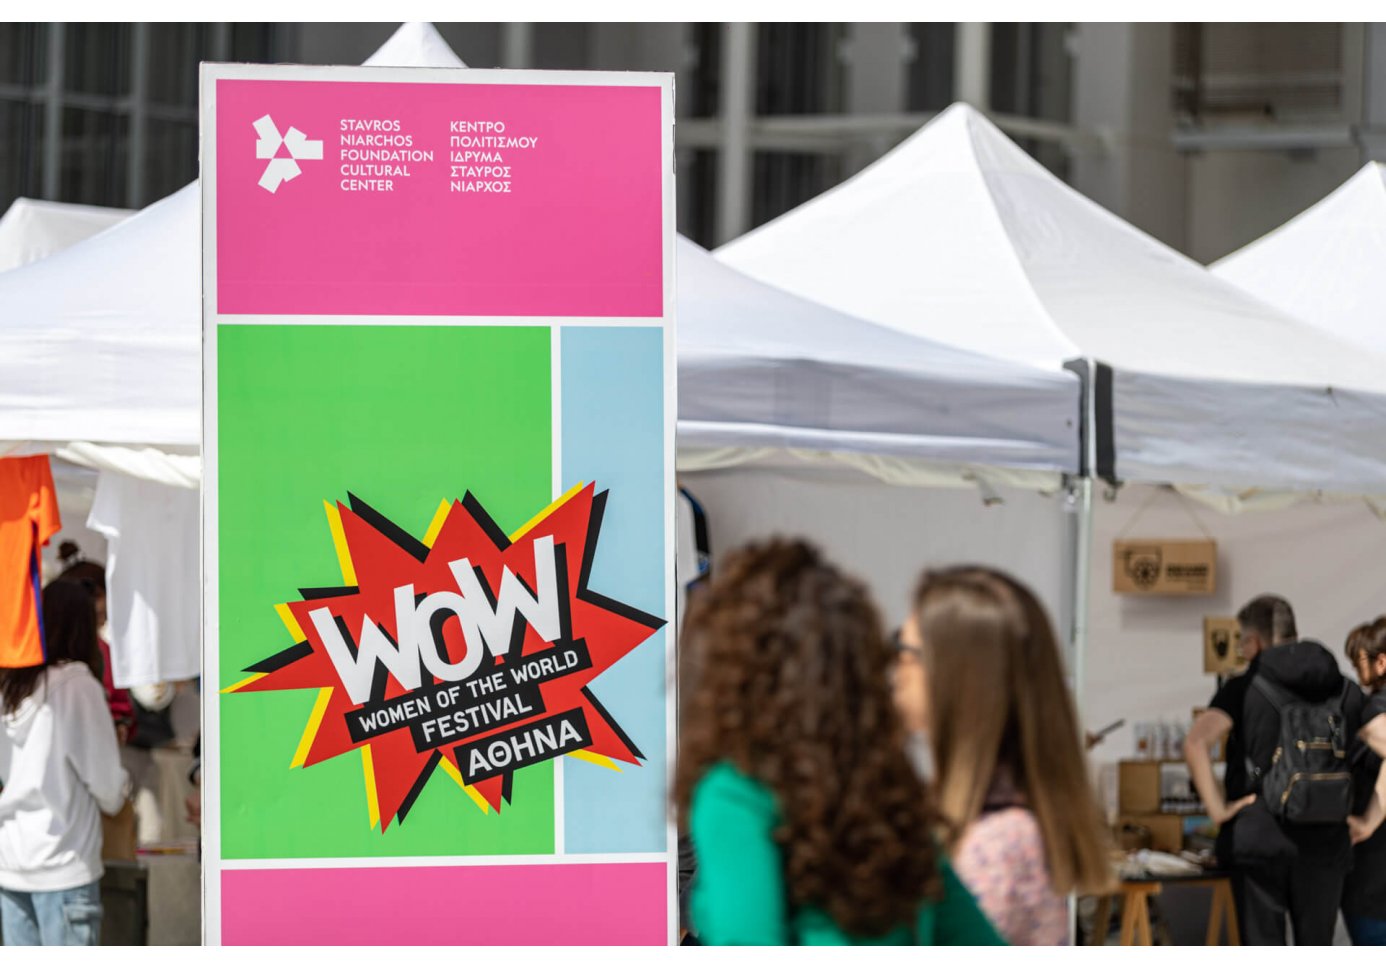 two women passing in front of a banner that reads "wow - women of the world festival athens", white tents in the background